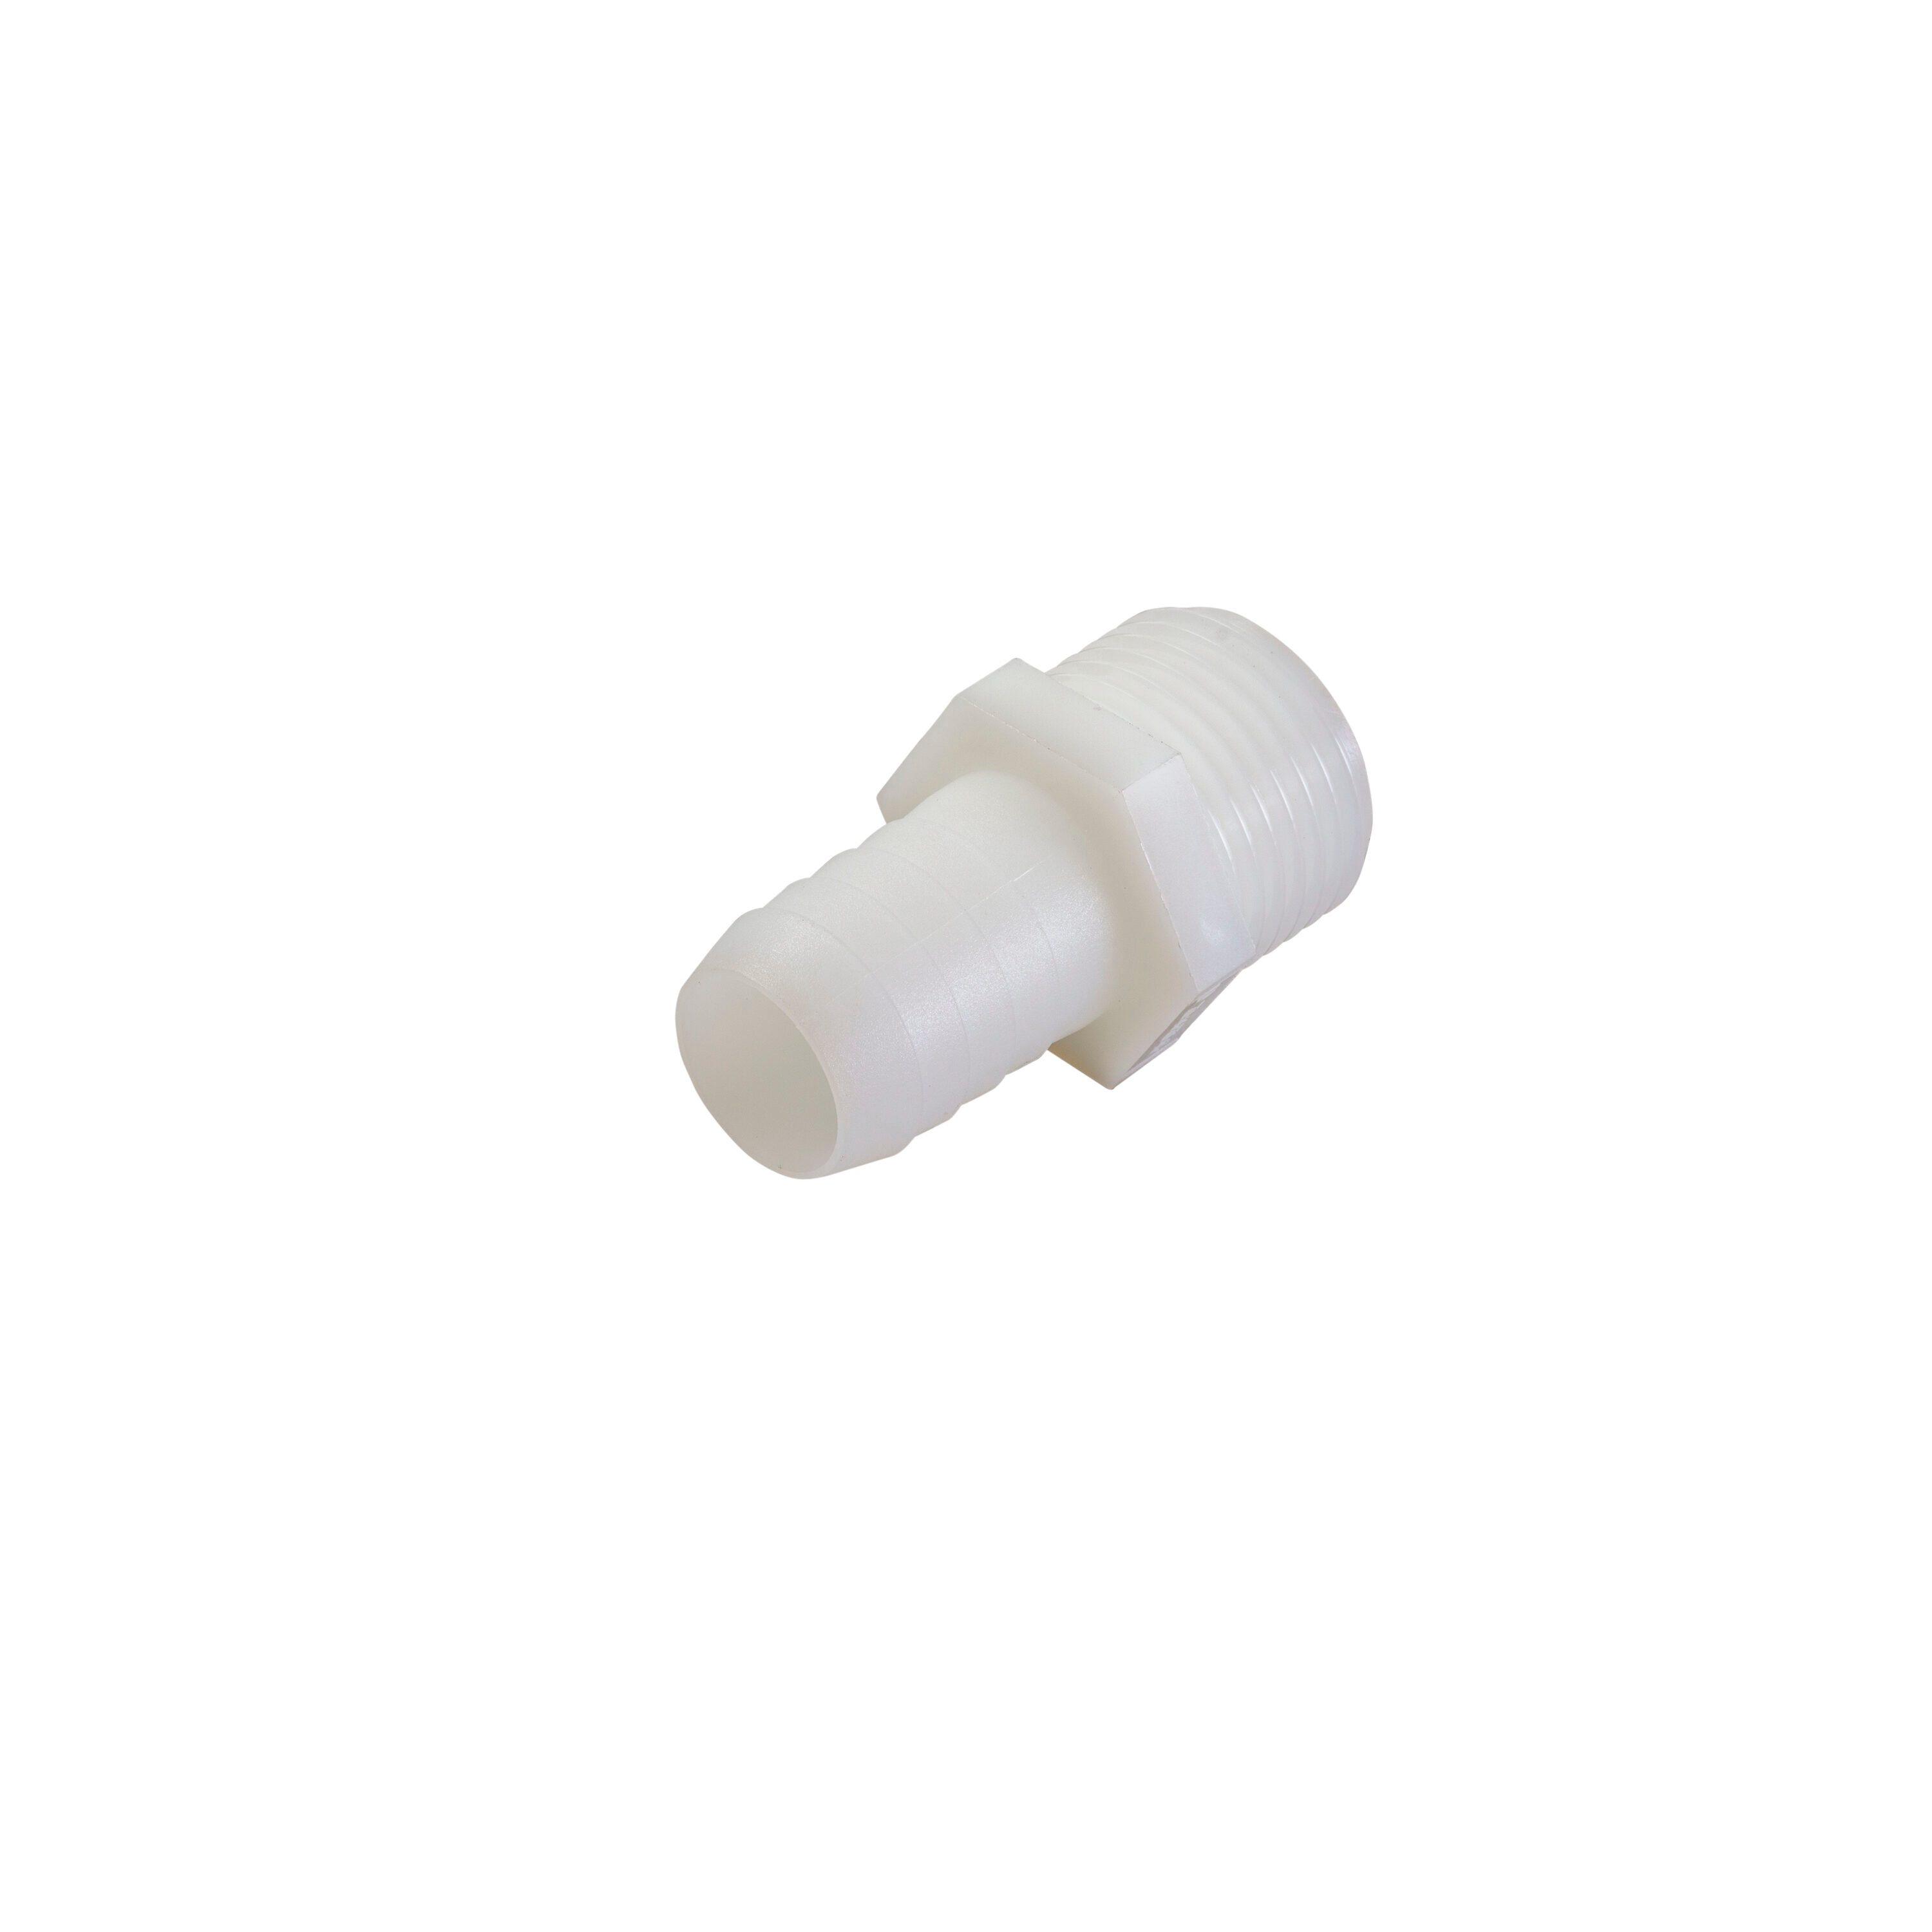 Proline Series 3/4-in x 3/4-in Threaded Female Adapter Fitting in the